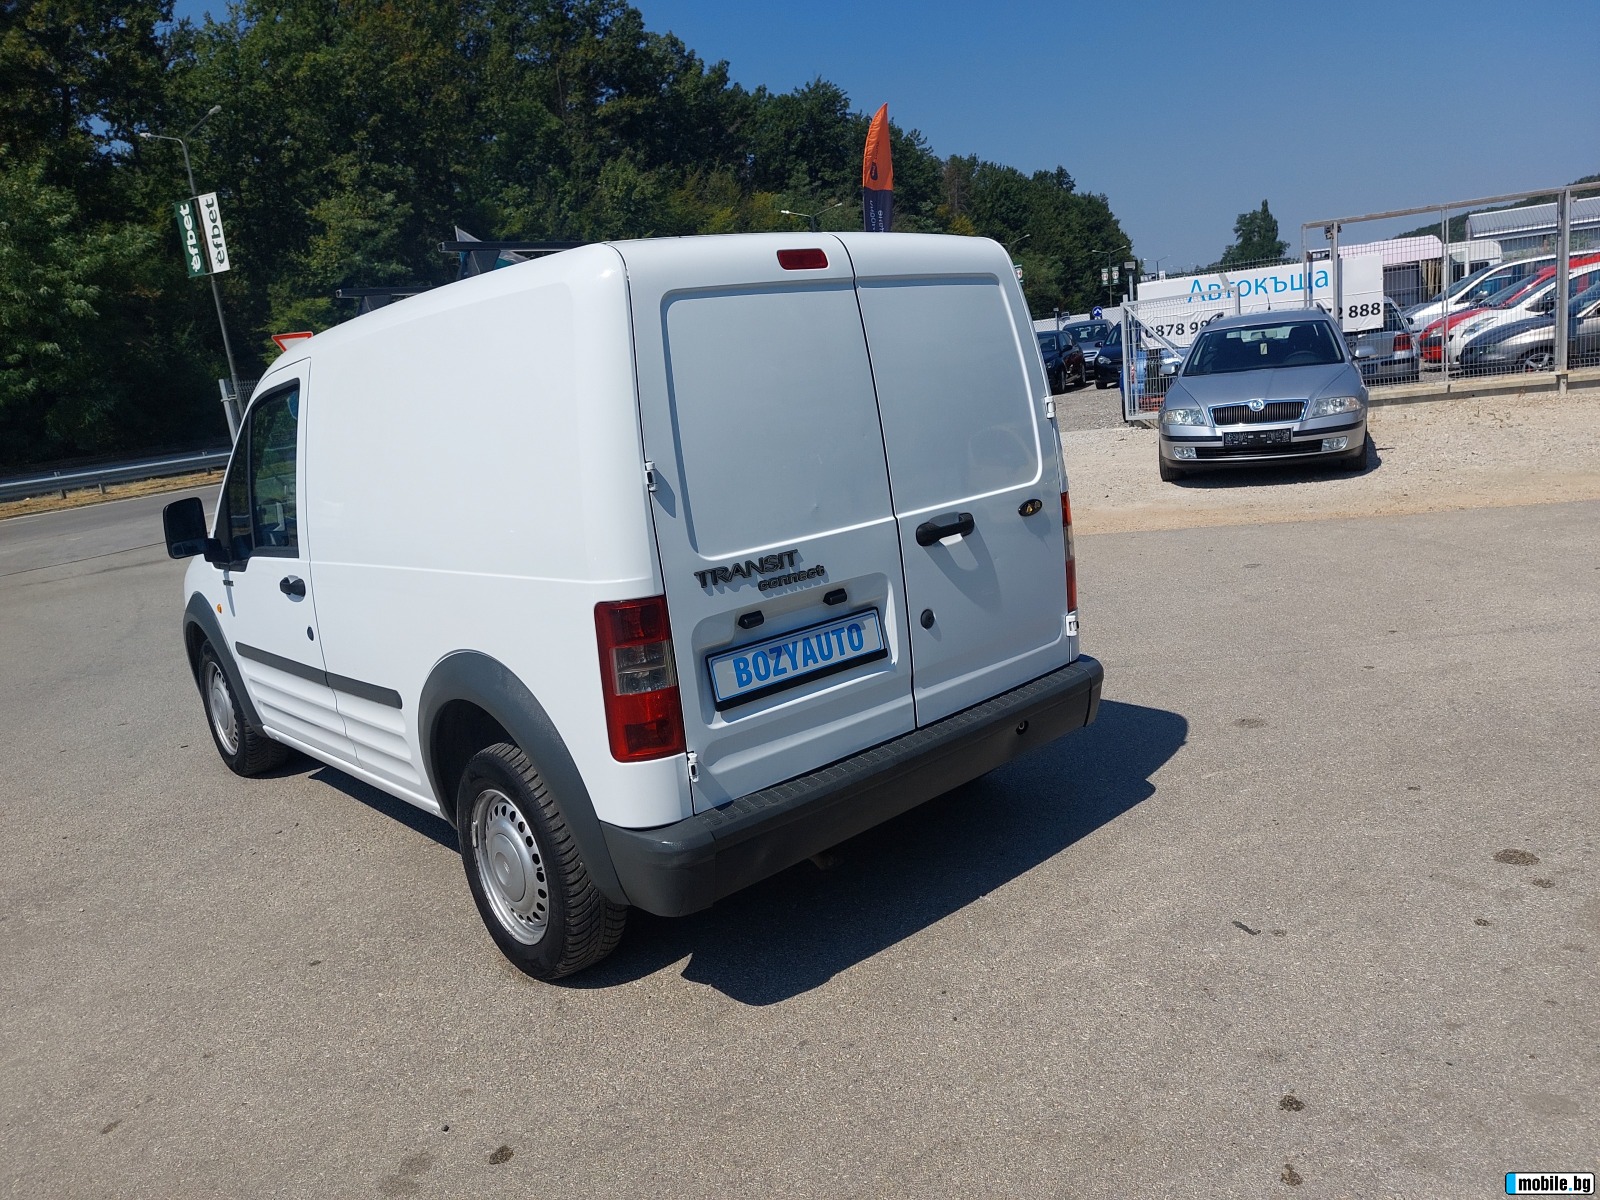 Ford Connect 1.8TDCi/90ps | Mobile.bg   4